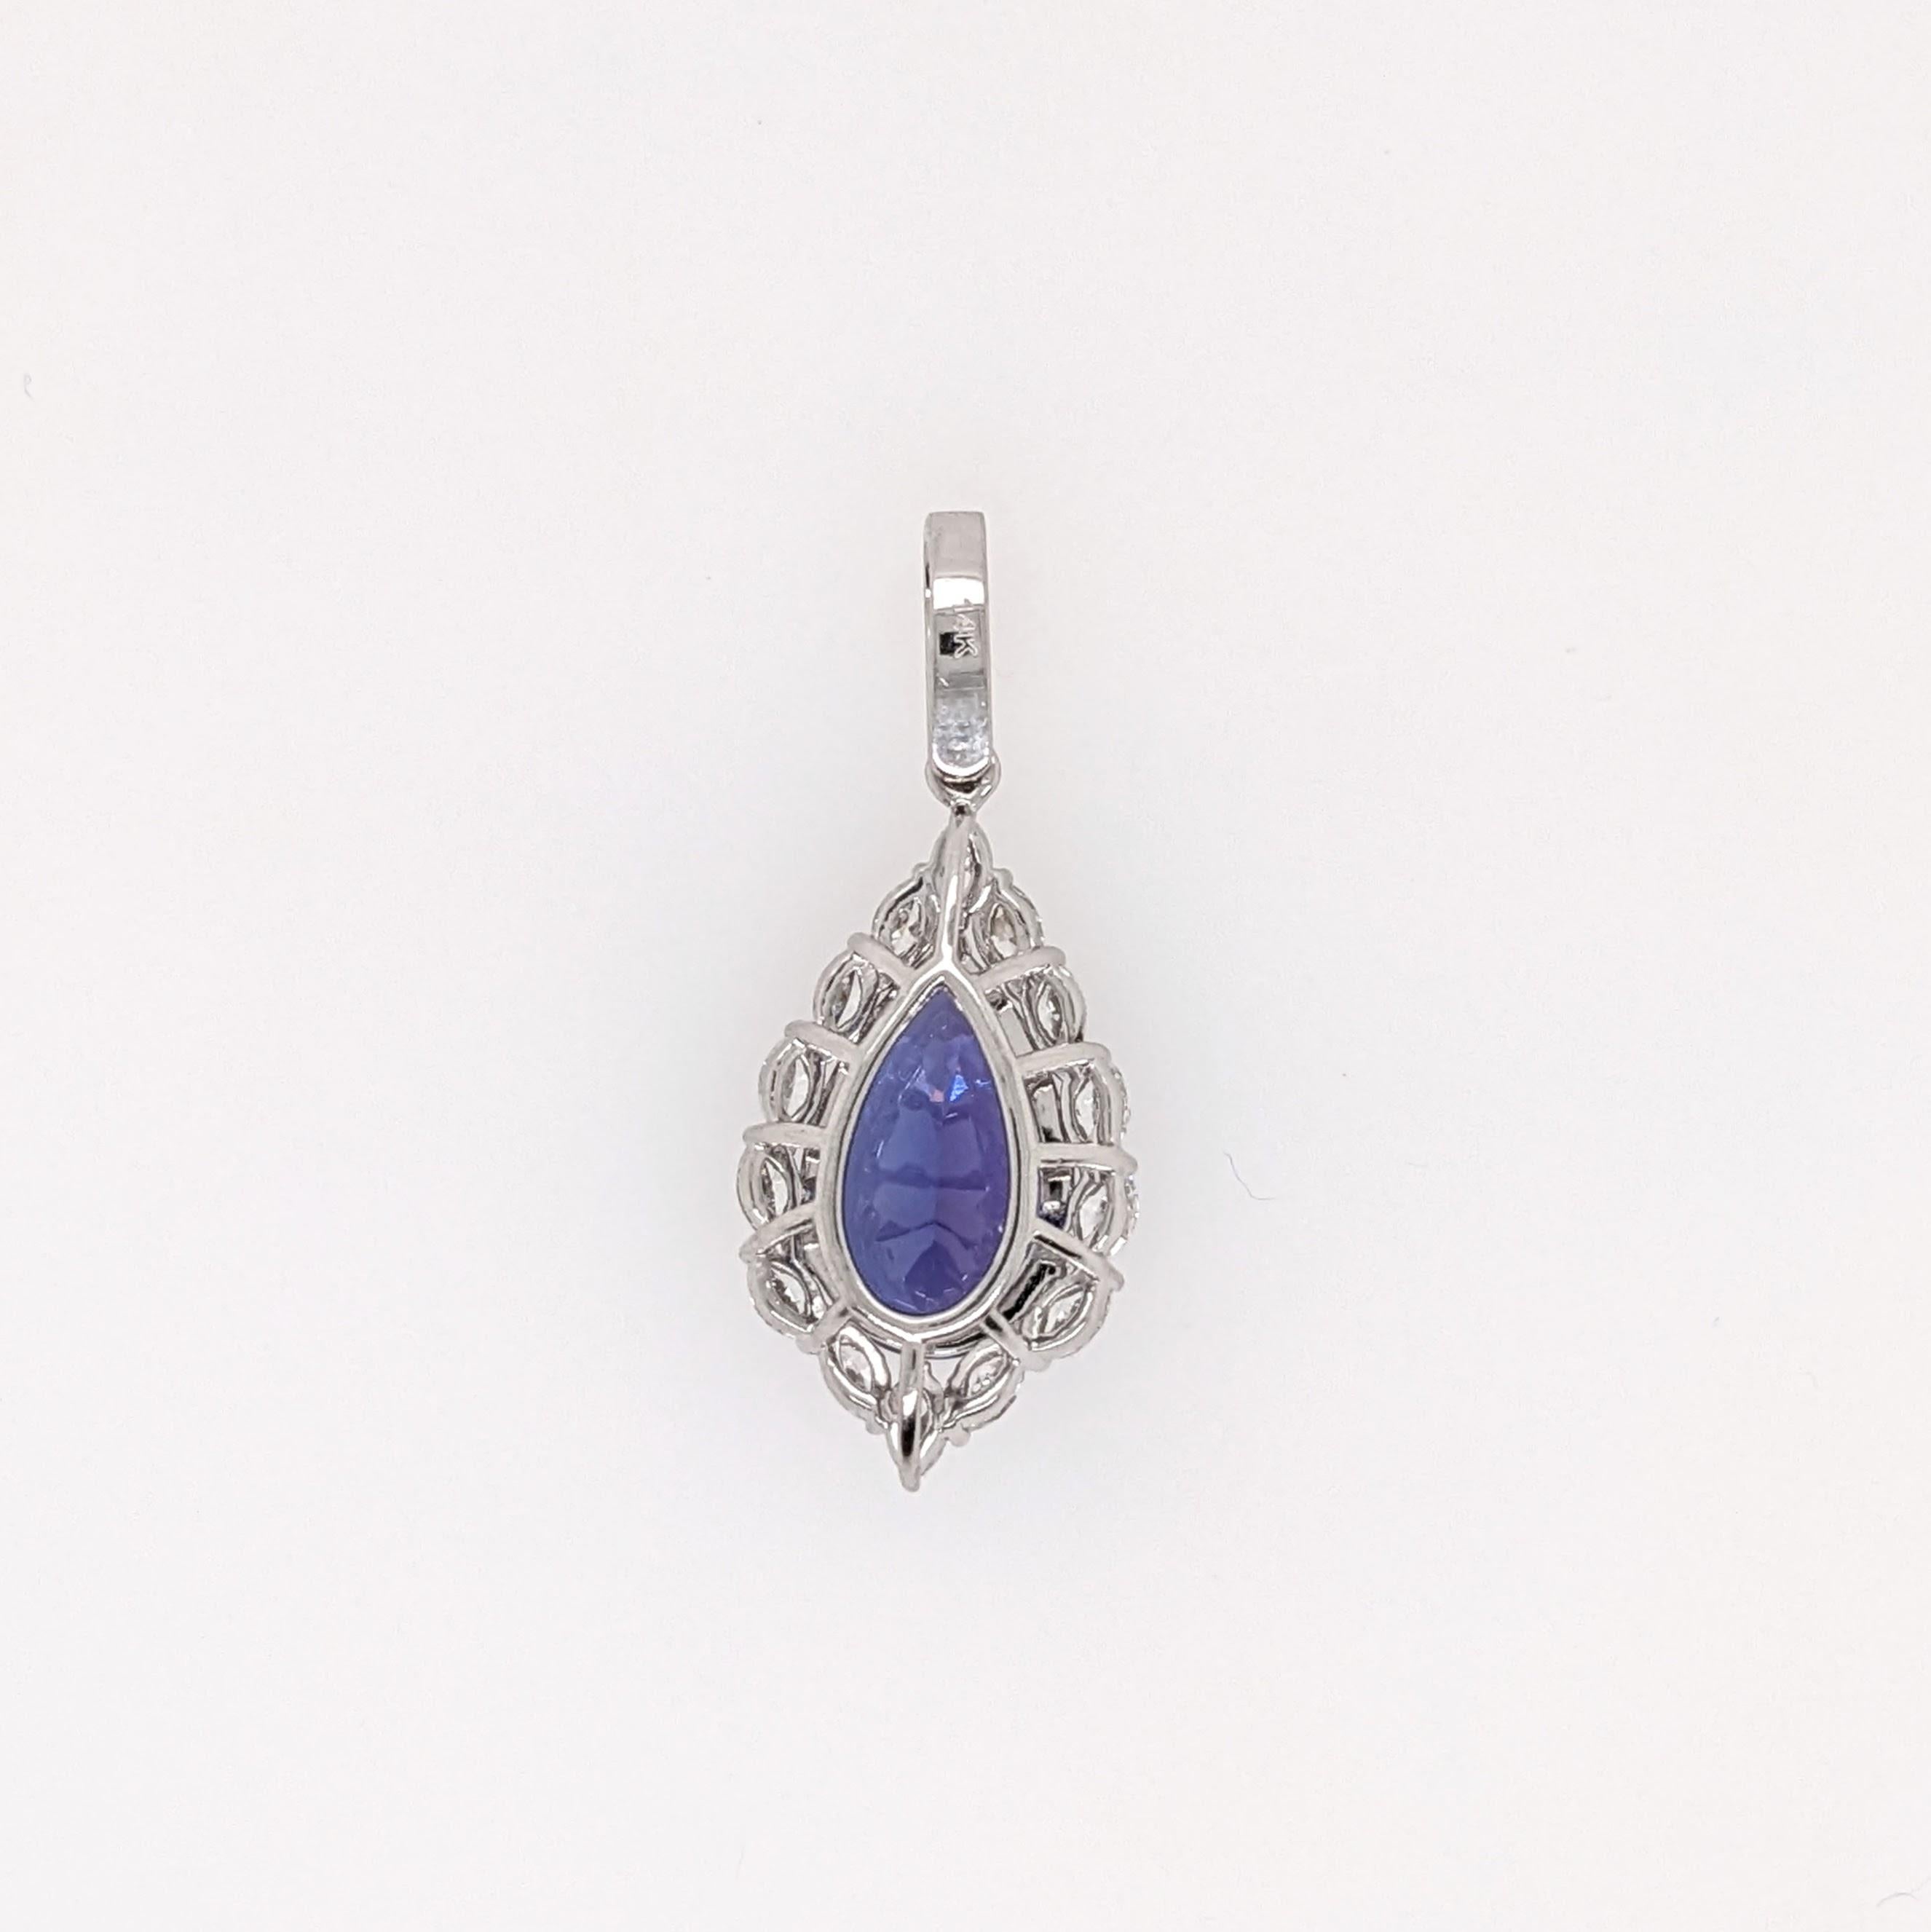 This deluxe tanzanite is absolutely gorgeous with a rich blue color and beautiful clean oval cut. We set it in a new NNJ pendant design (that reminds us a little of a pineapple!) made in 14k solid white gold and studded with all natural diamonds. A